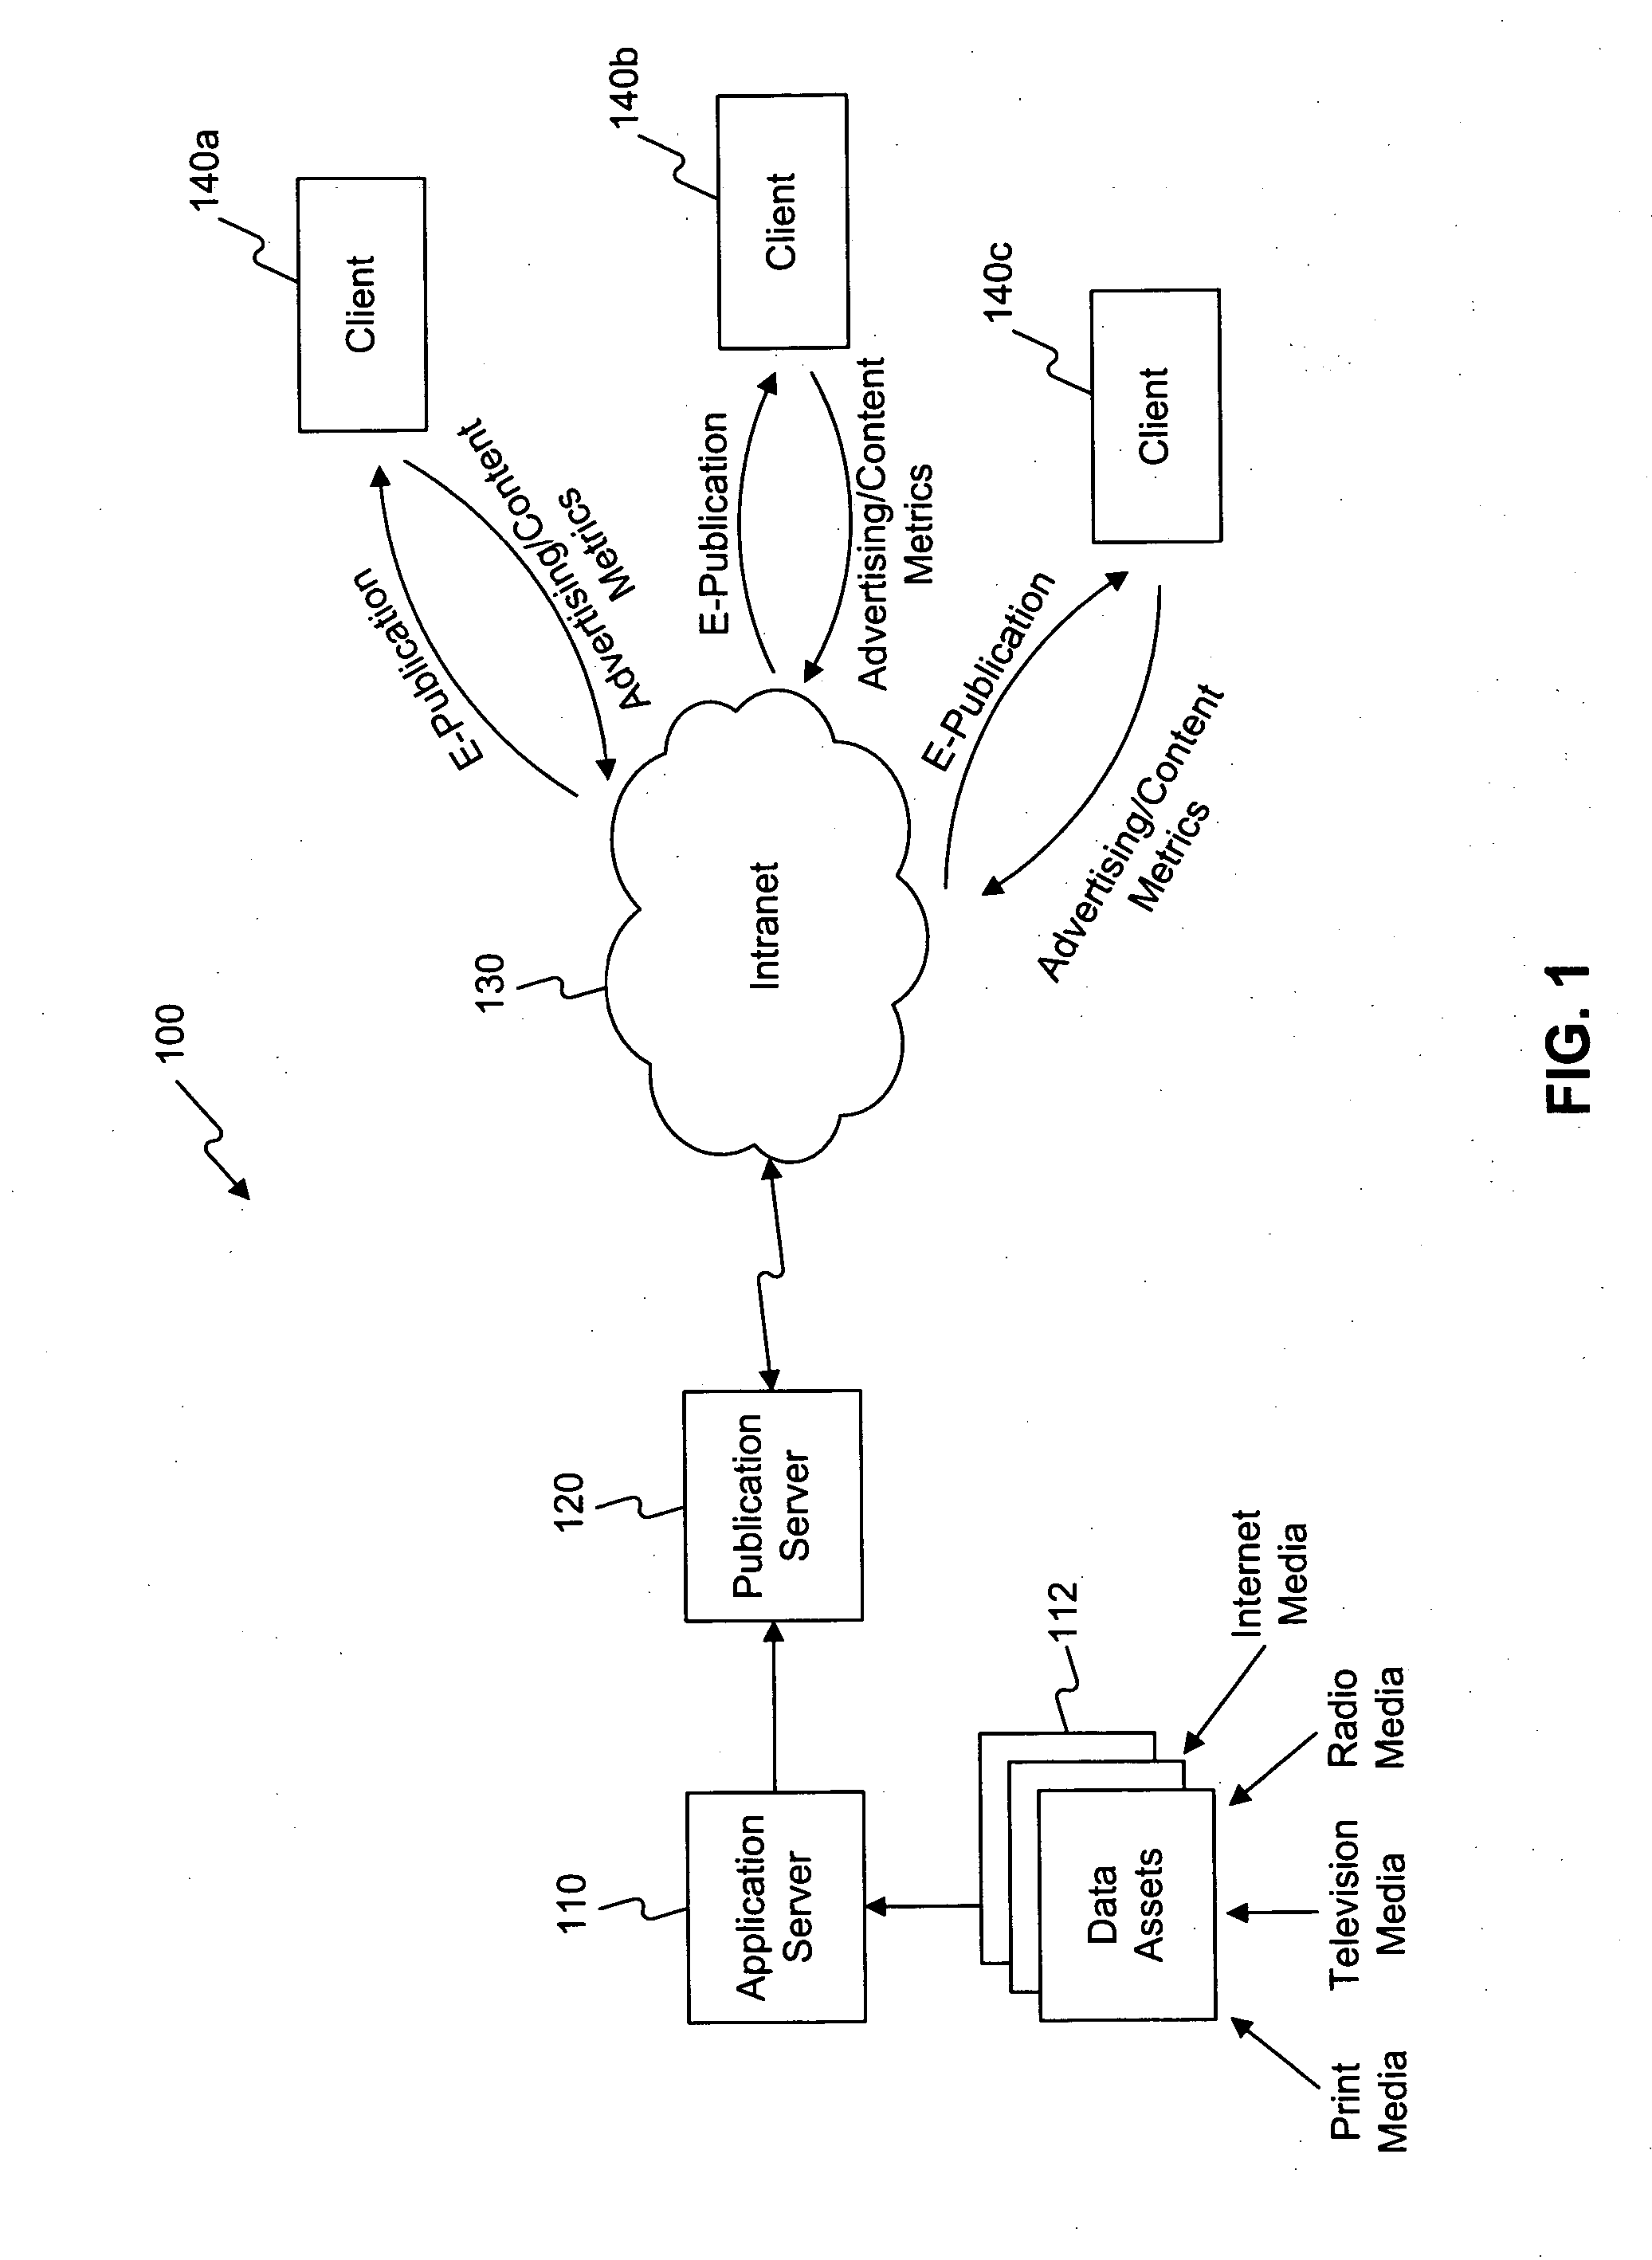 System and method for creating dynamic electronic publications